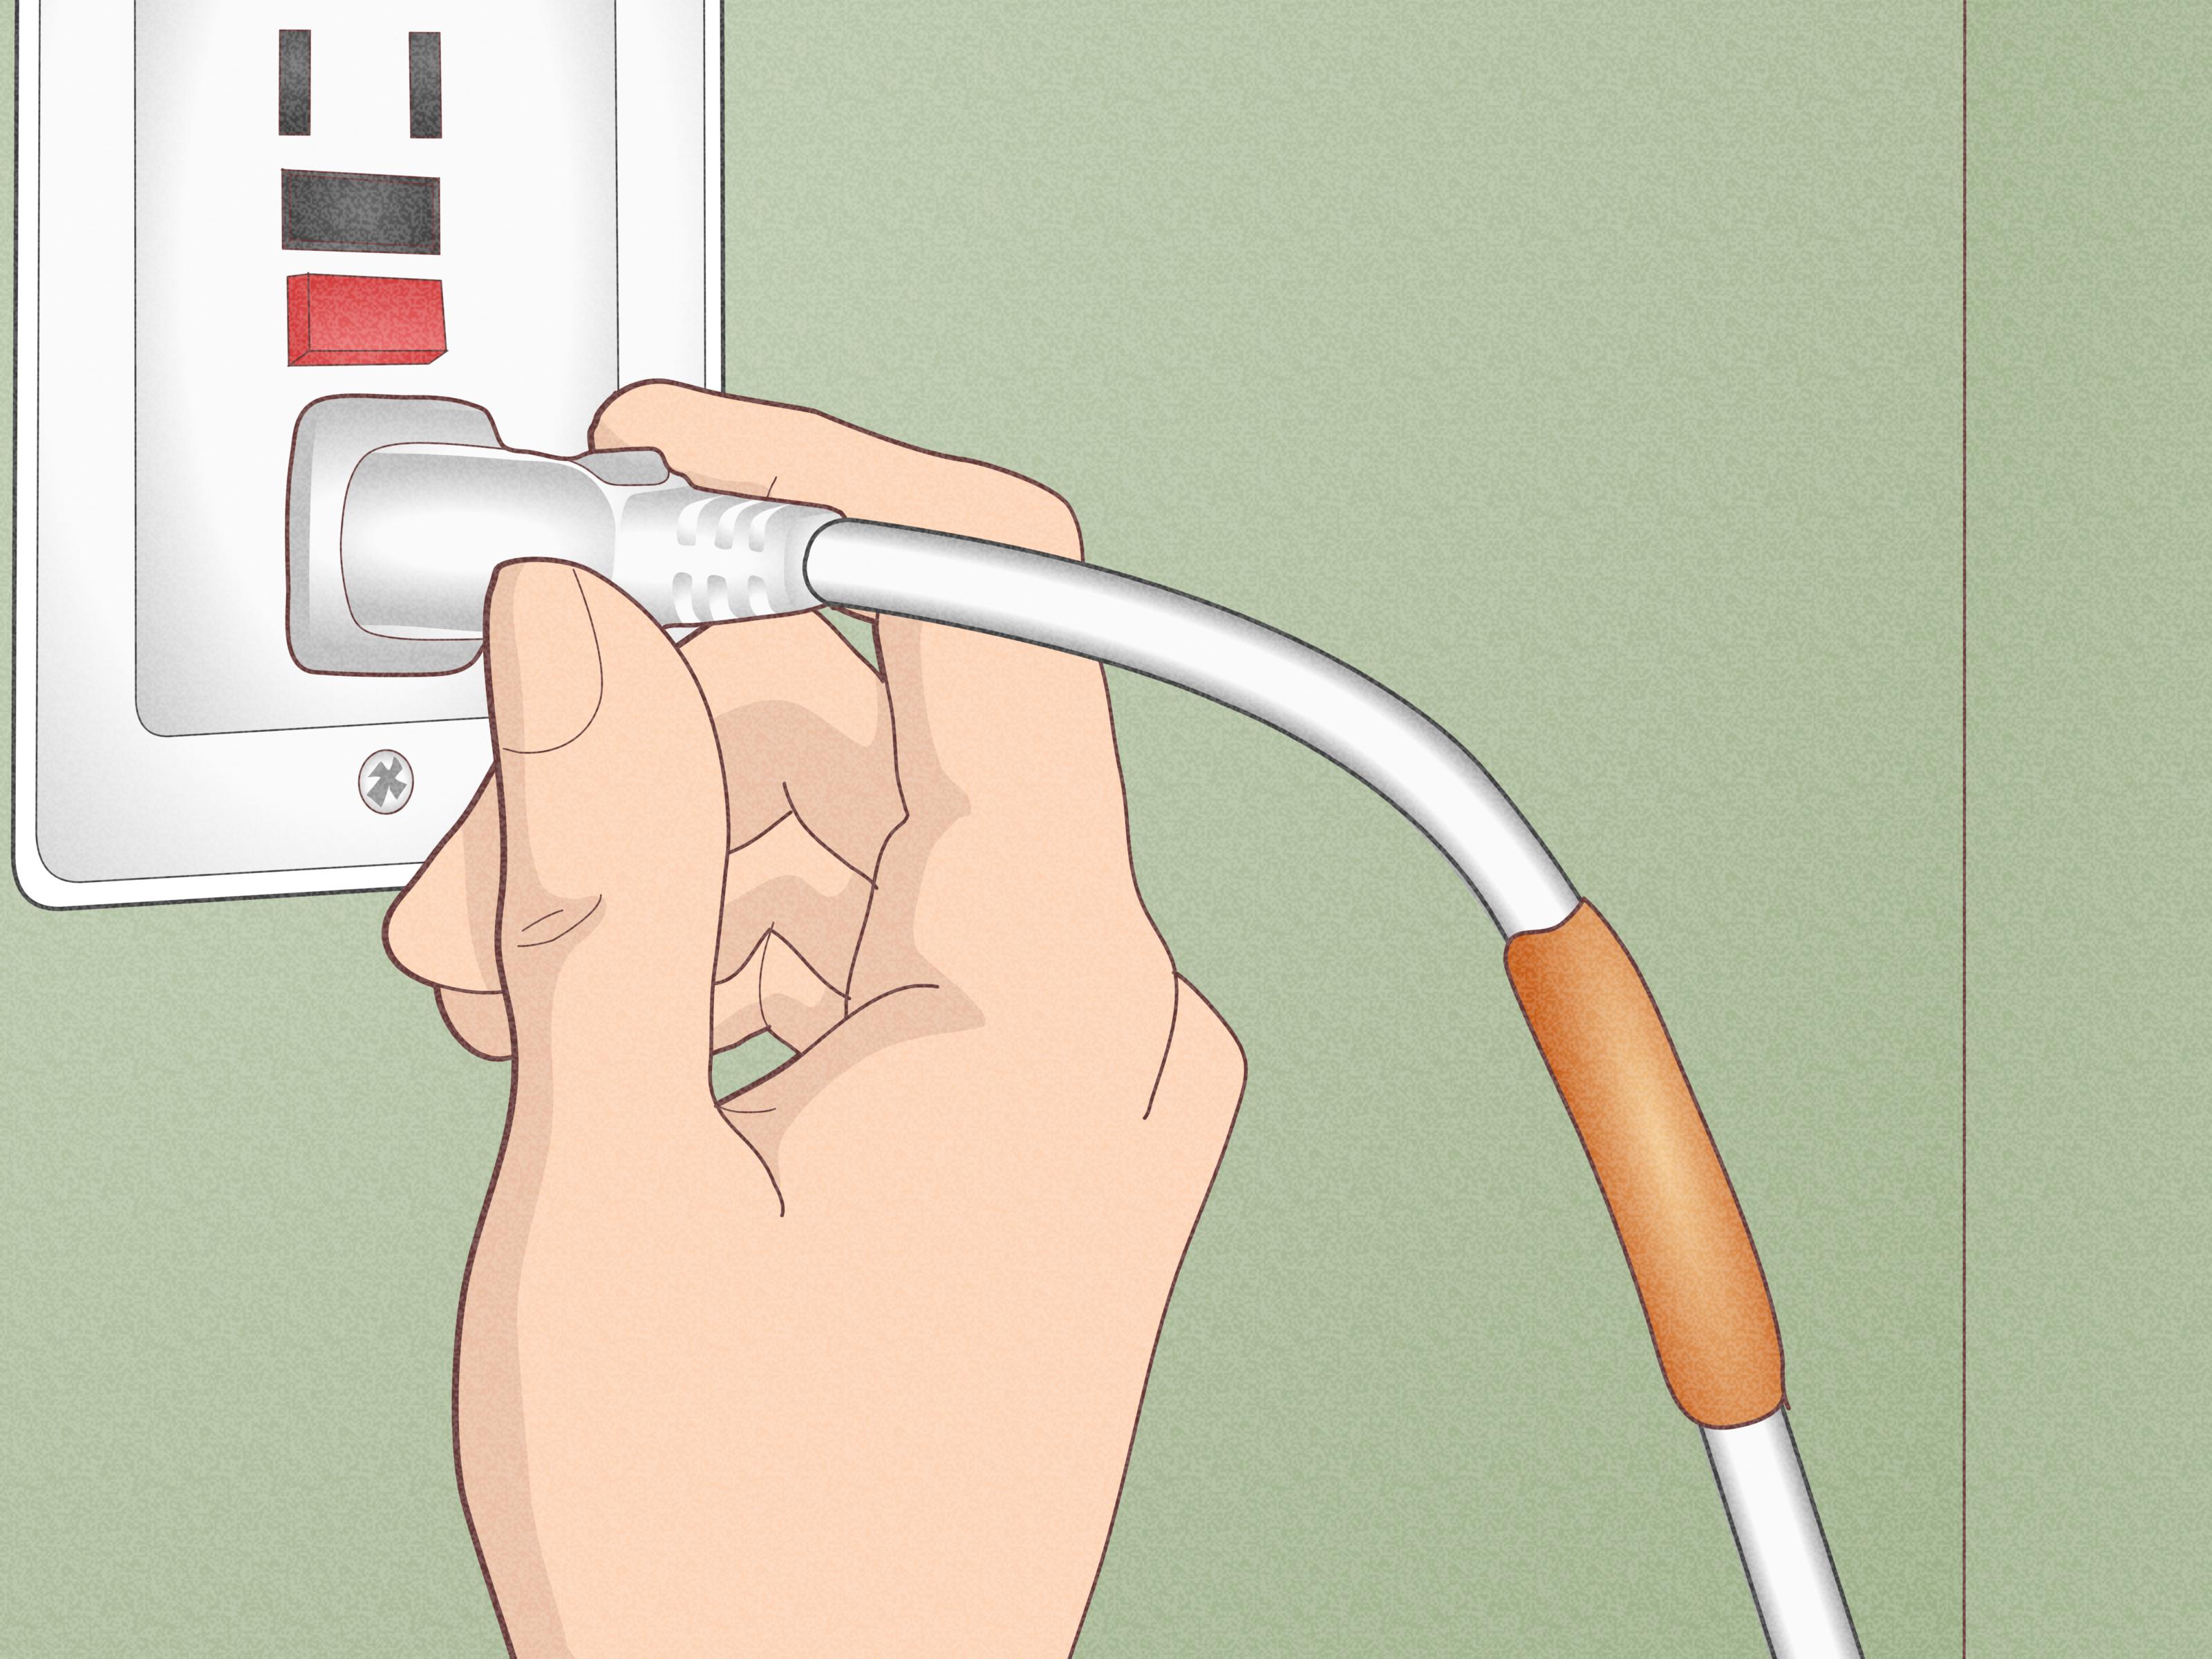 Ensure all cables and connectors are securely attached.
Inspect for any signs of damage or loose connections.